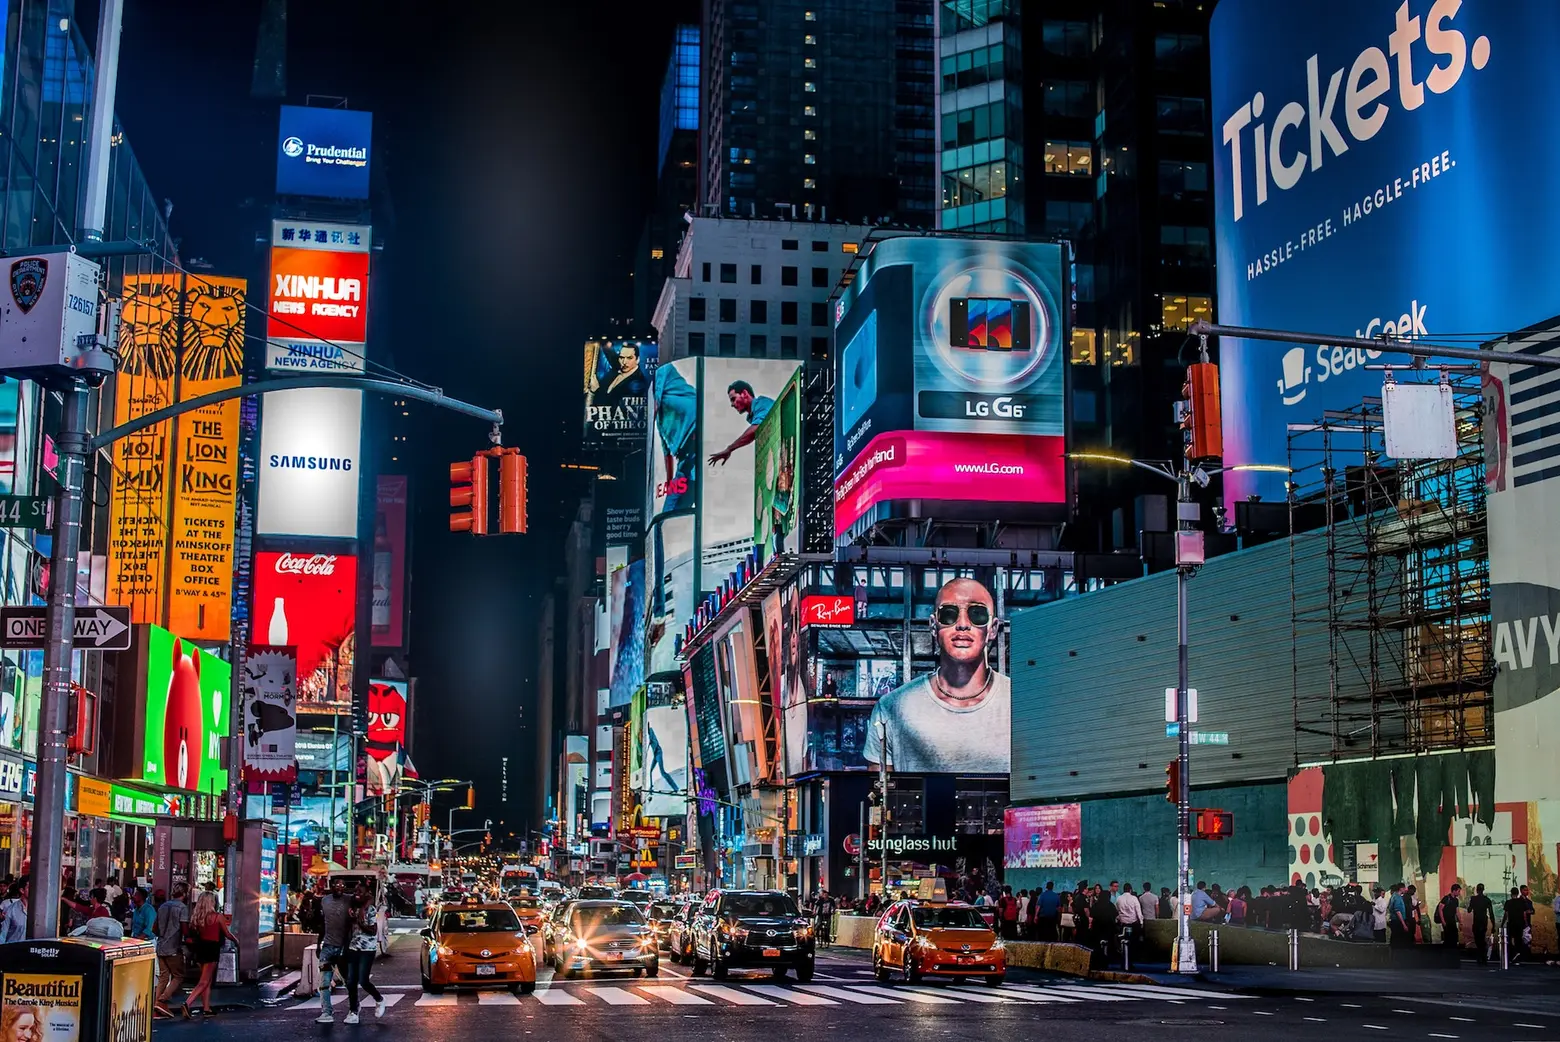 COVID vaccination site opens in Times Square for theater, film, and TV workers